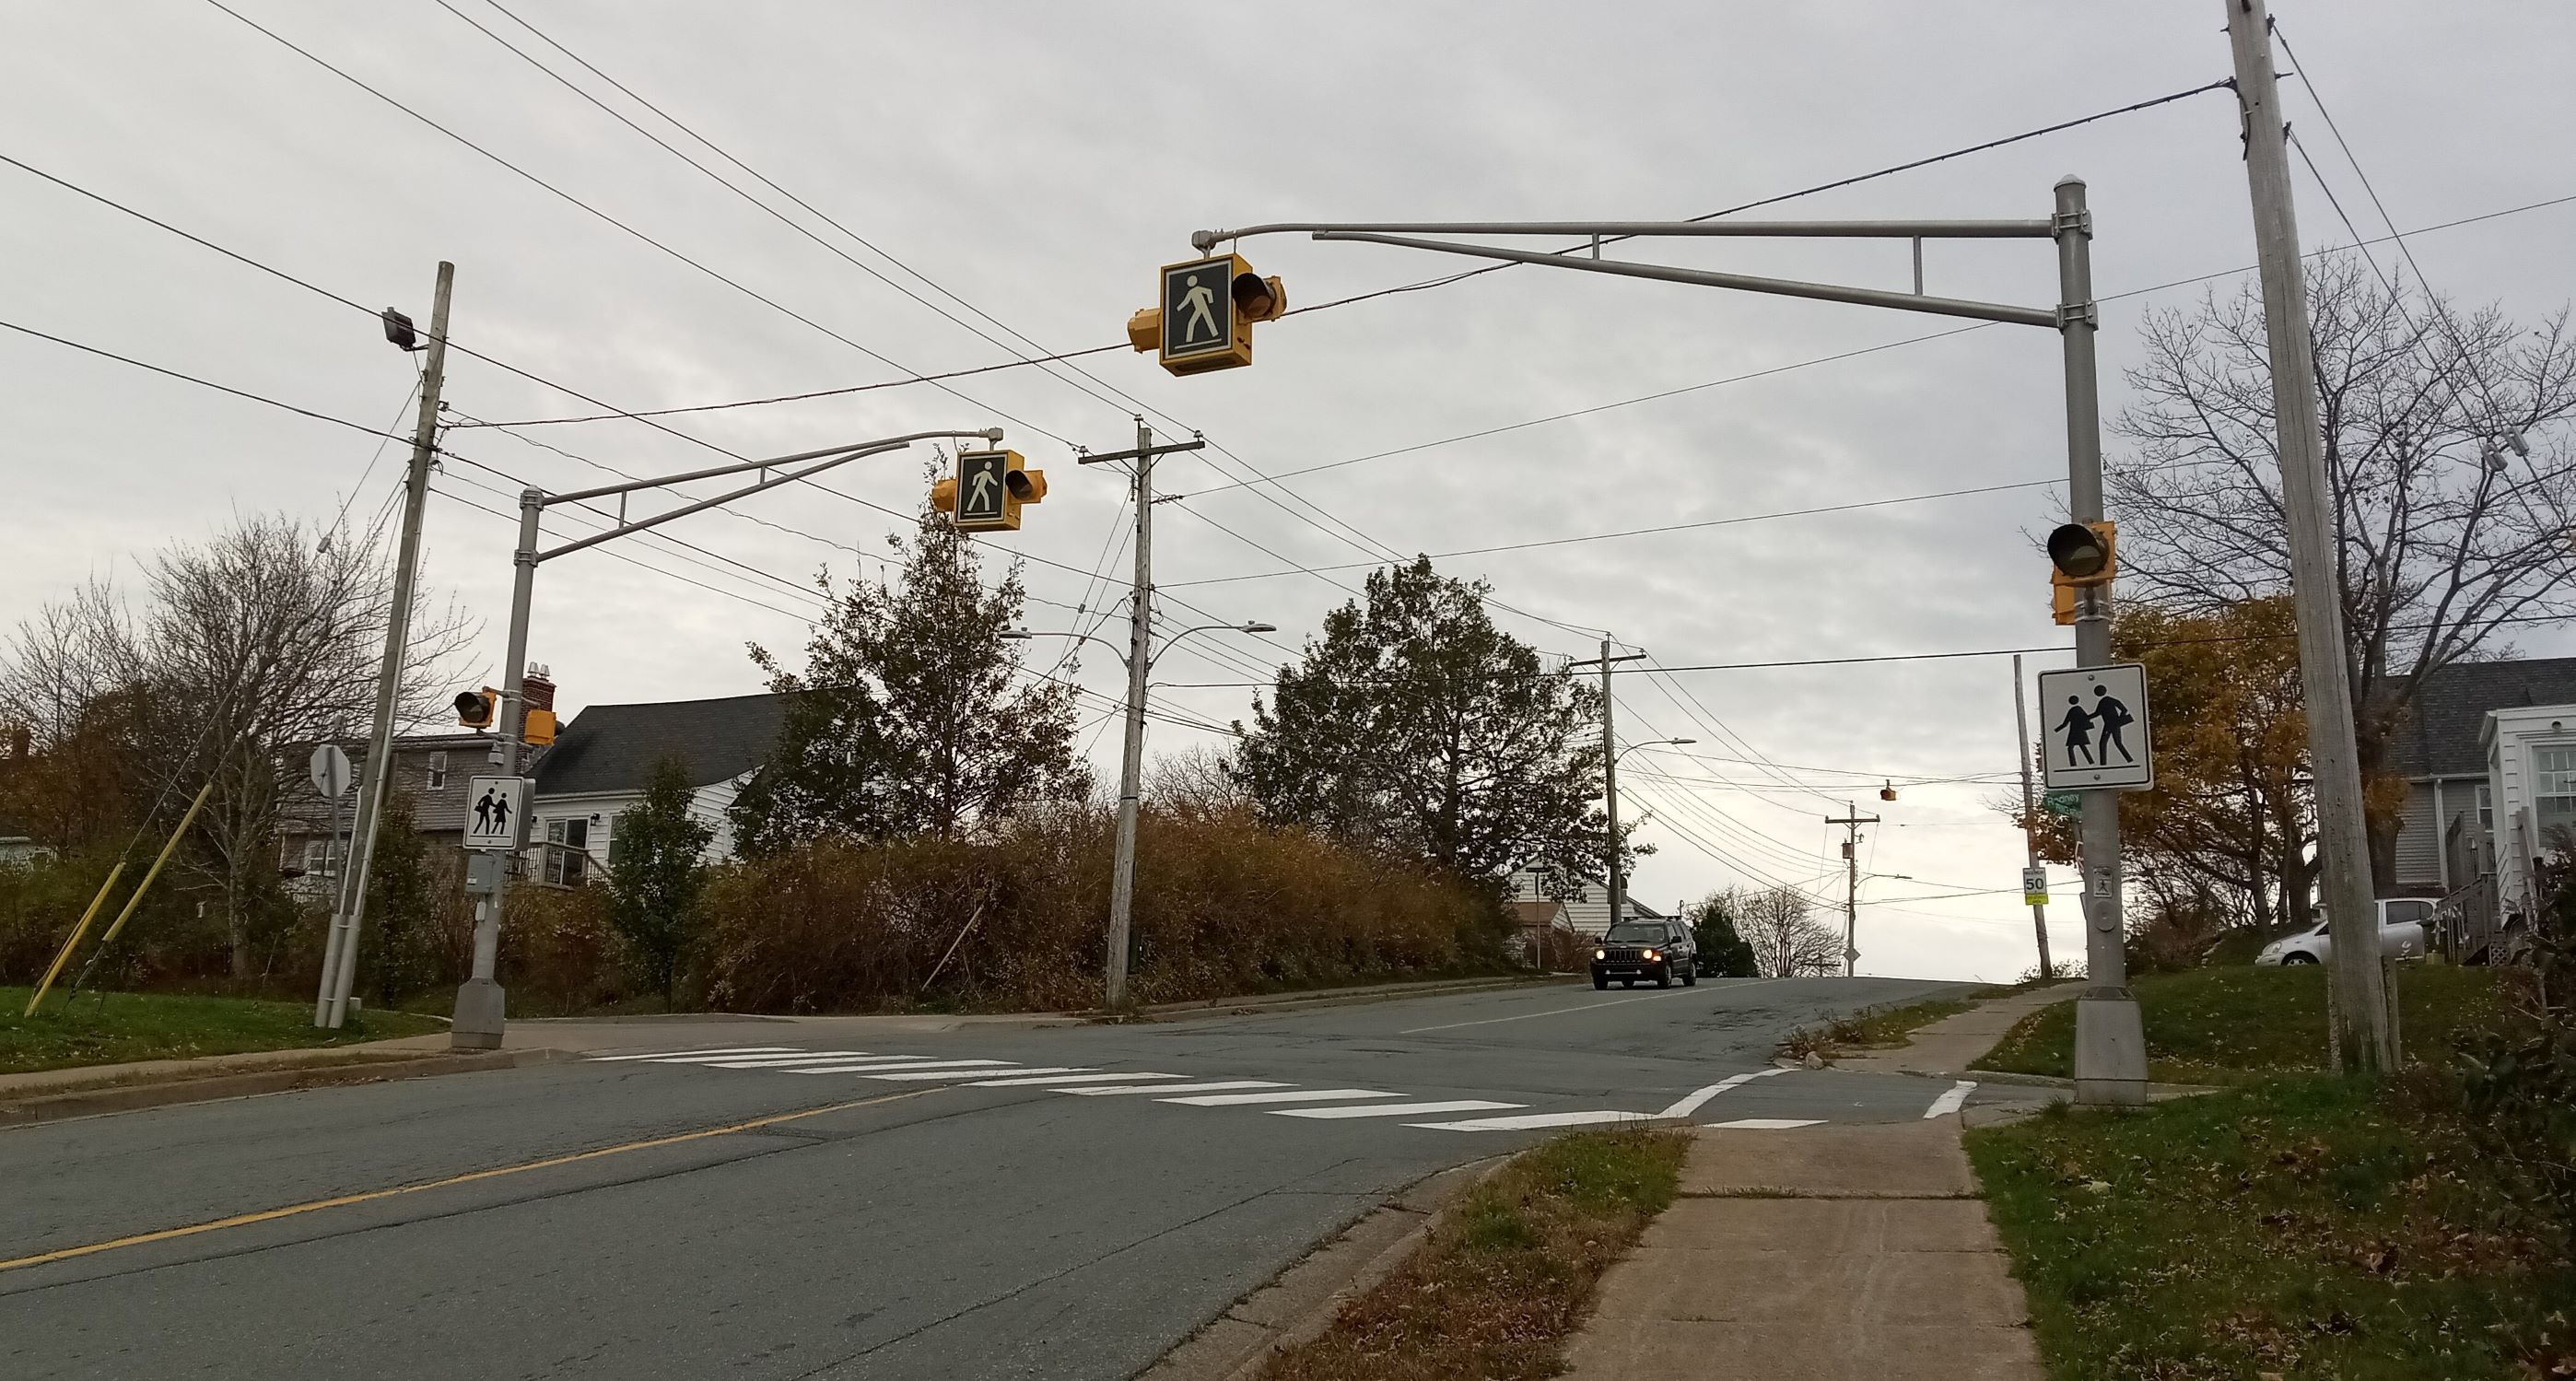 Road with a crosswalk that has overhead flashing beacons